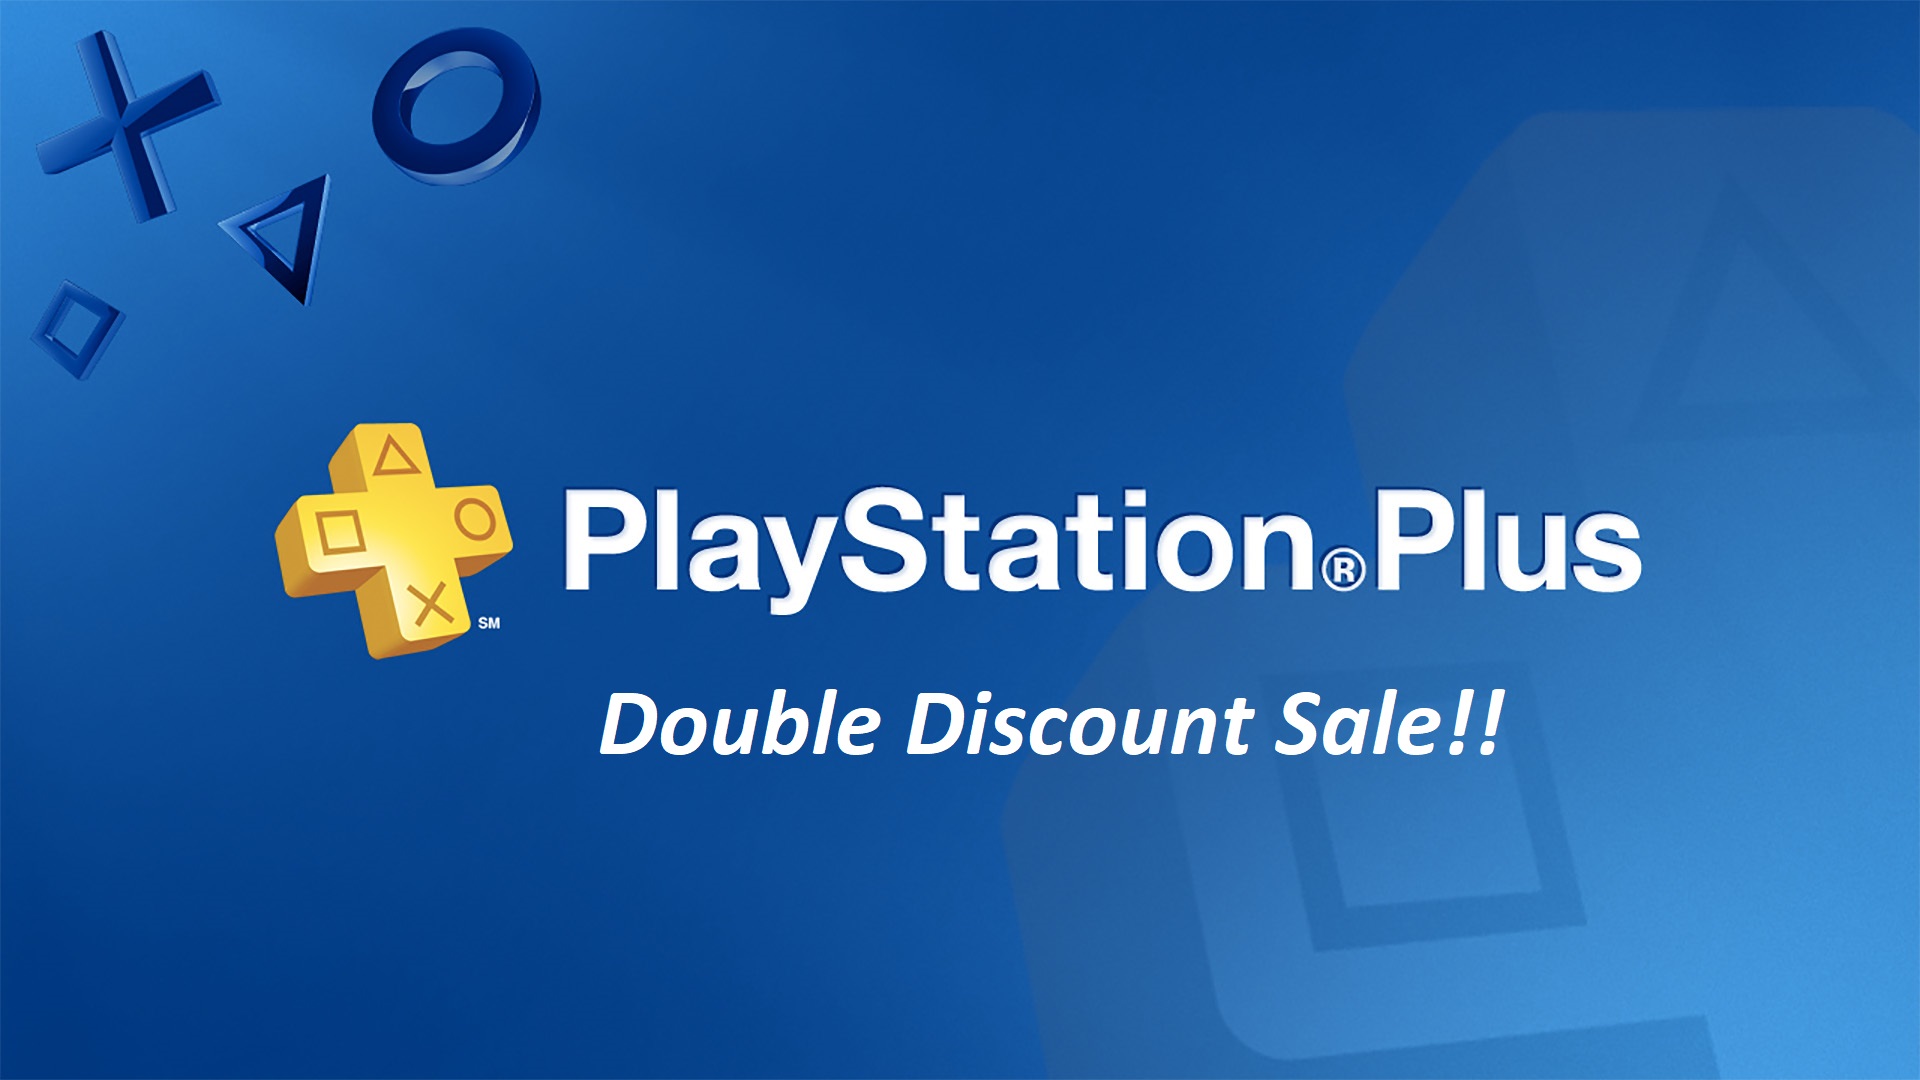 PlayStation Plus Double Discount